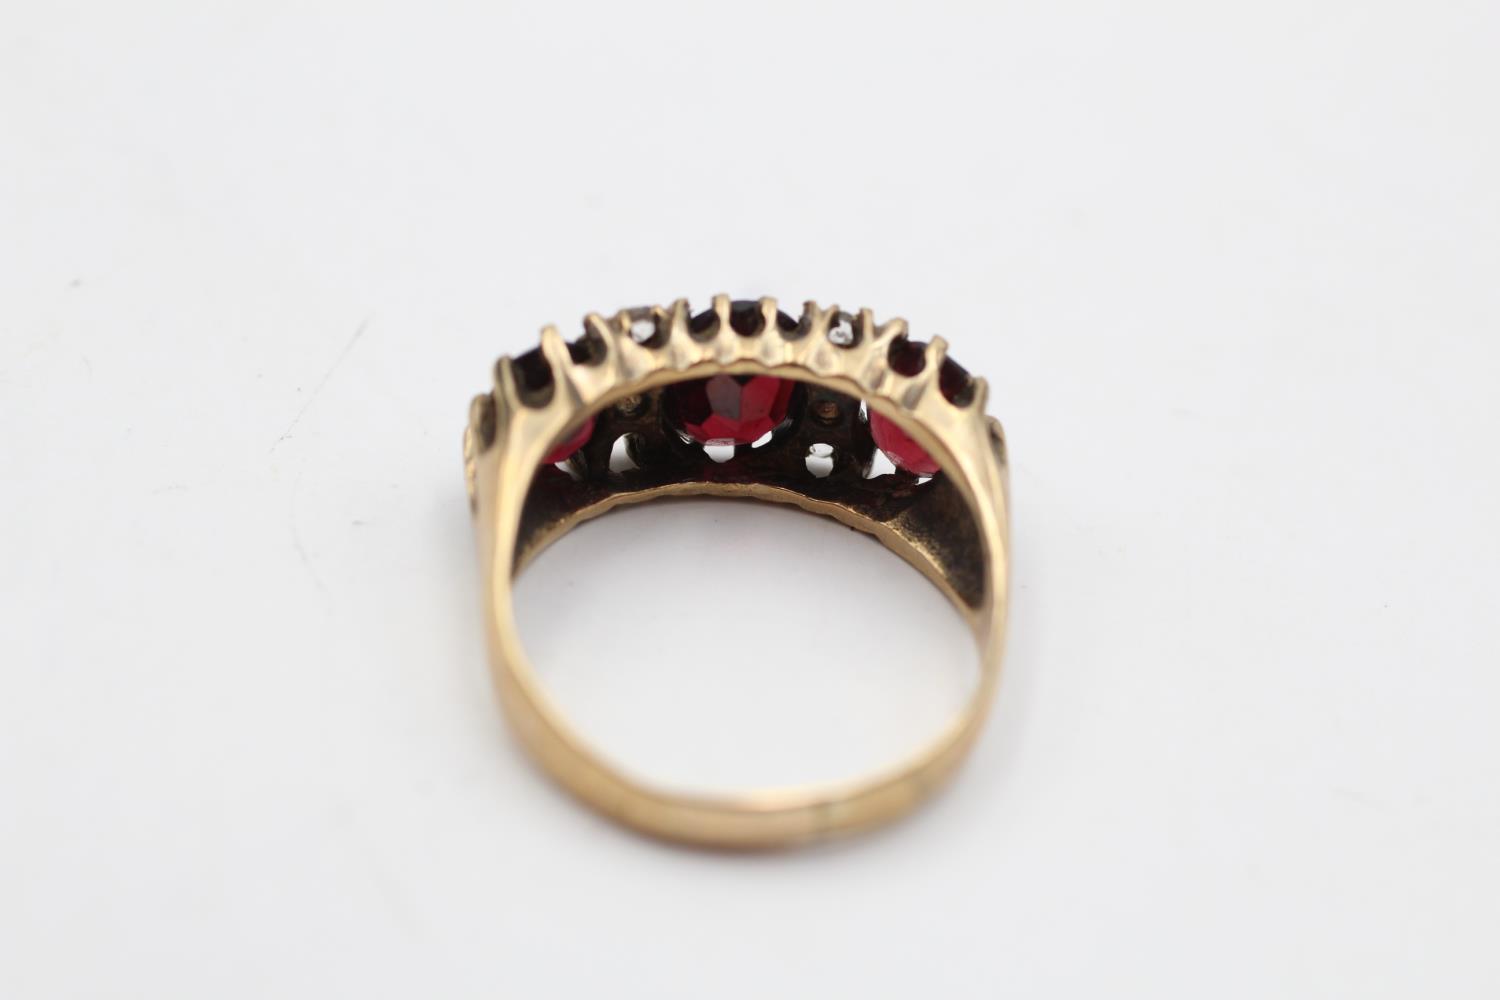 9ct gold vintage garnet & clear gemstone buttercup setting dress ring (4.6g) Size Q - Image 3 of 5